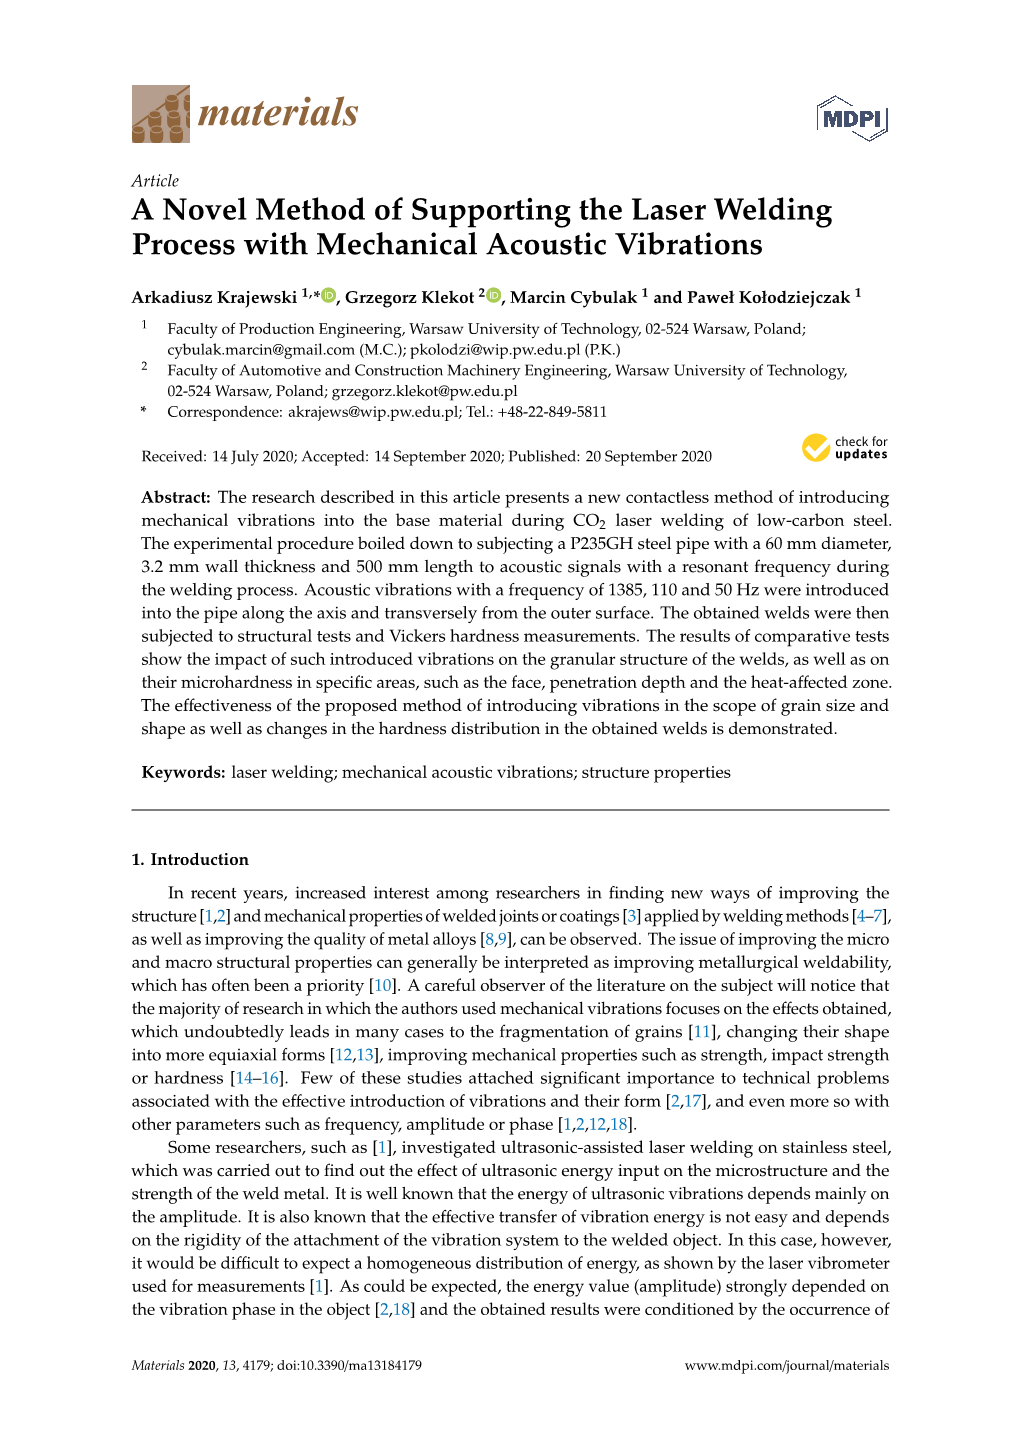 A Novel Method of Supporting the Laser Welding Process with Mechanical Acoustic Vibrations